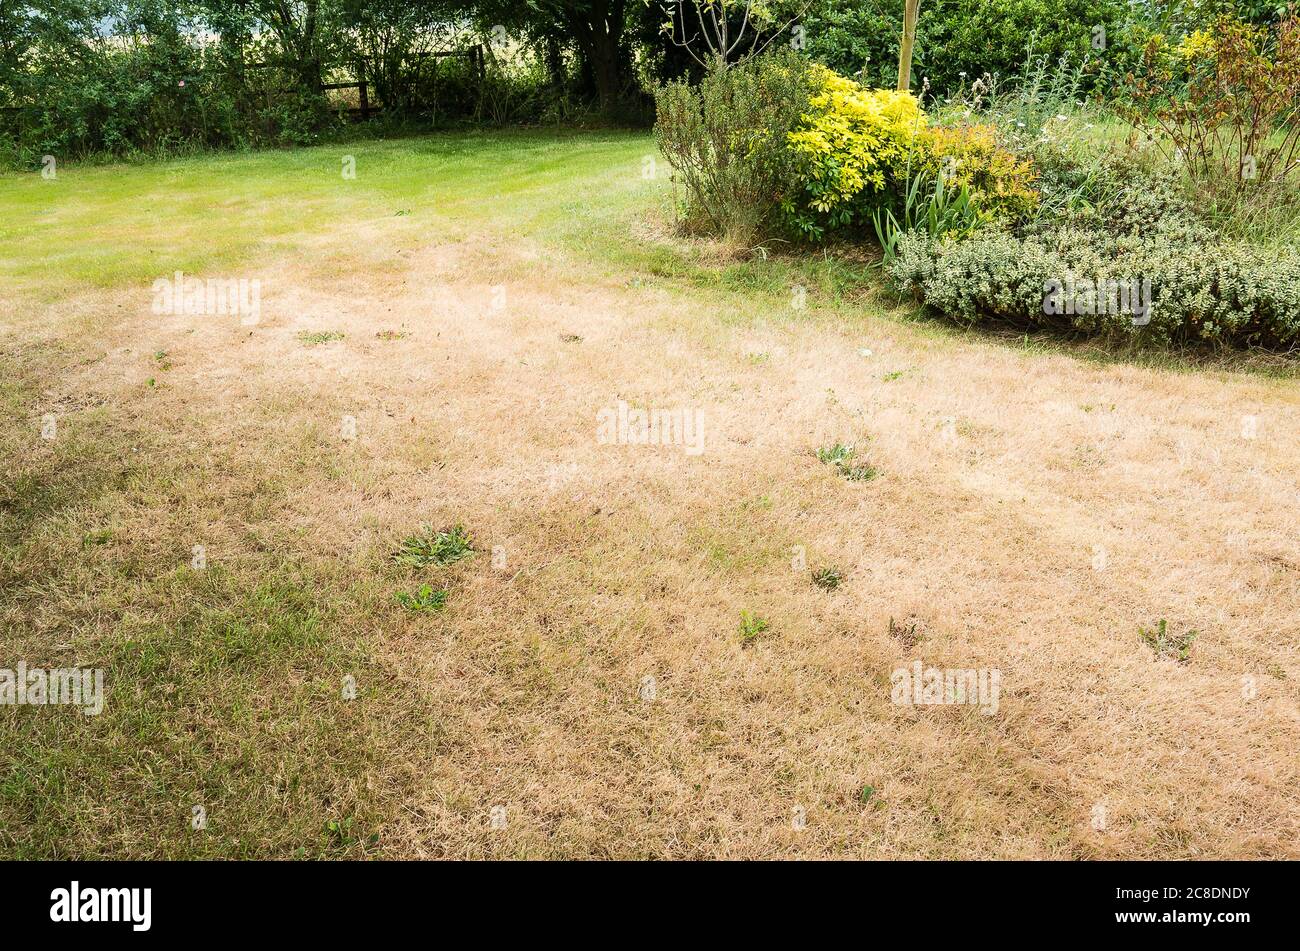 A grass lawn in summer showing how unshaded areas quickly dry and brown before recovering once rains return in the UK. Isolated green spots show how m Stock Photo